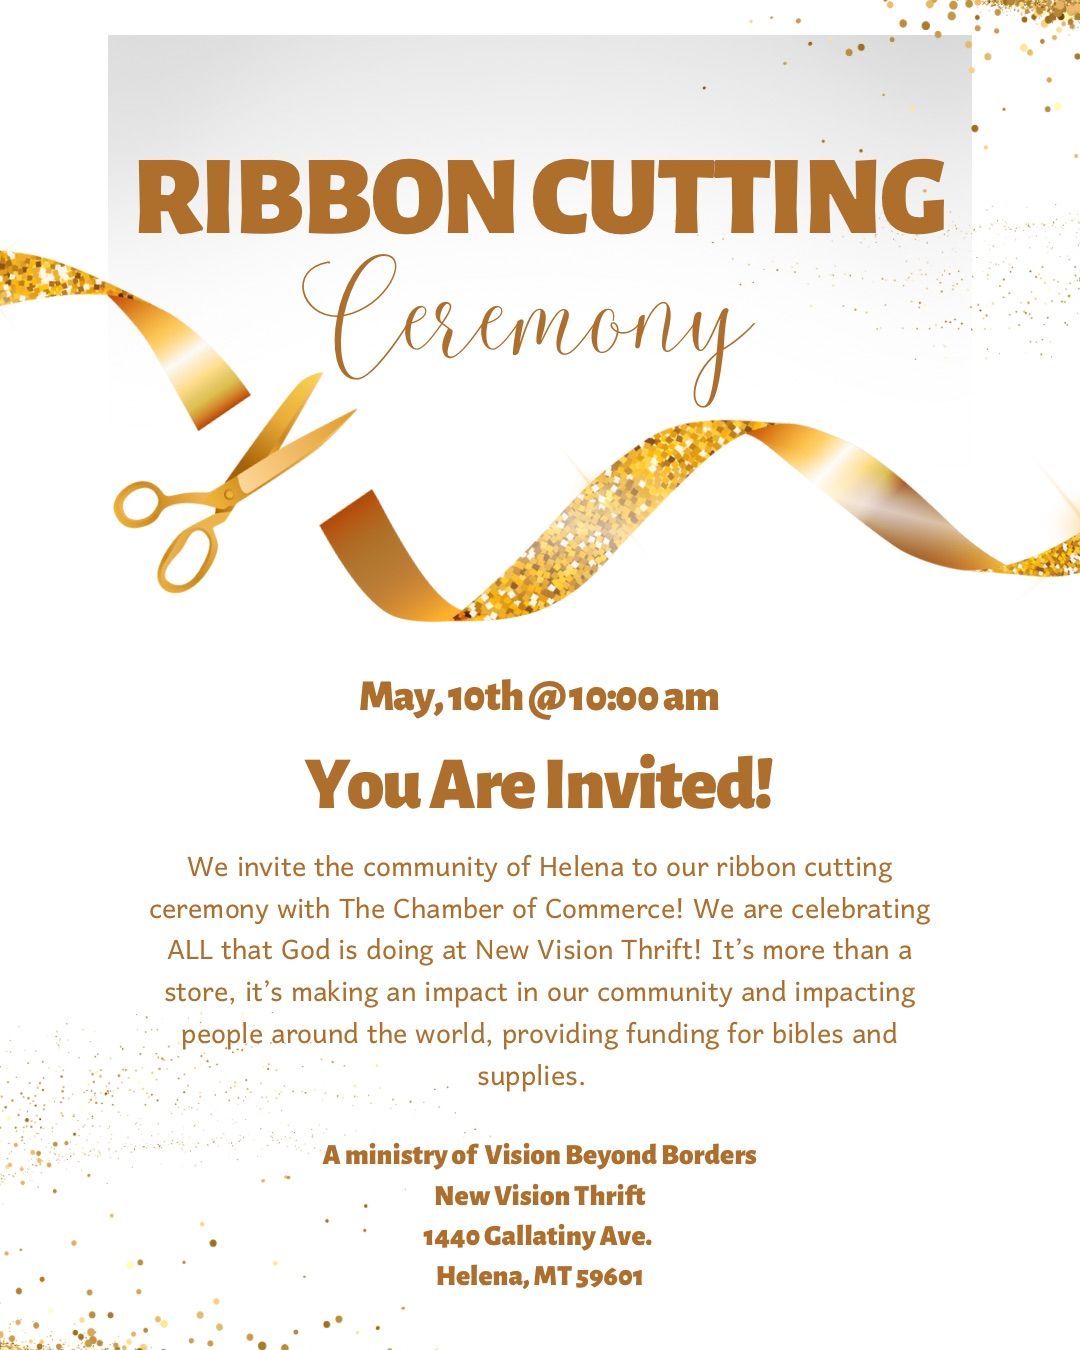 Ribbon Cutting Ceremony for New Vision Thrift